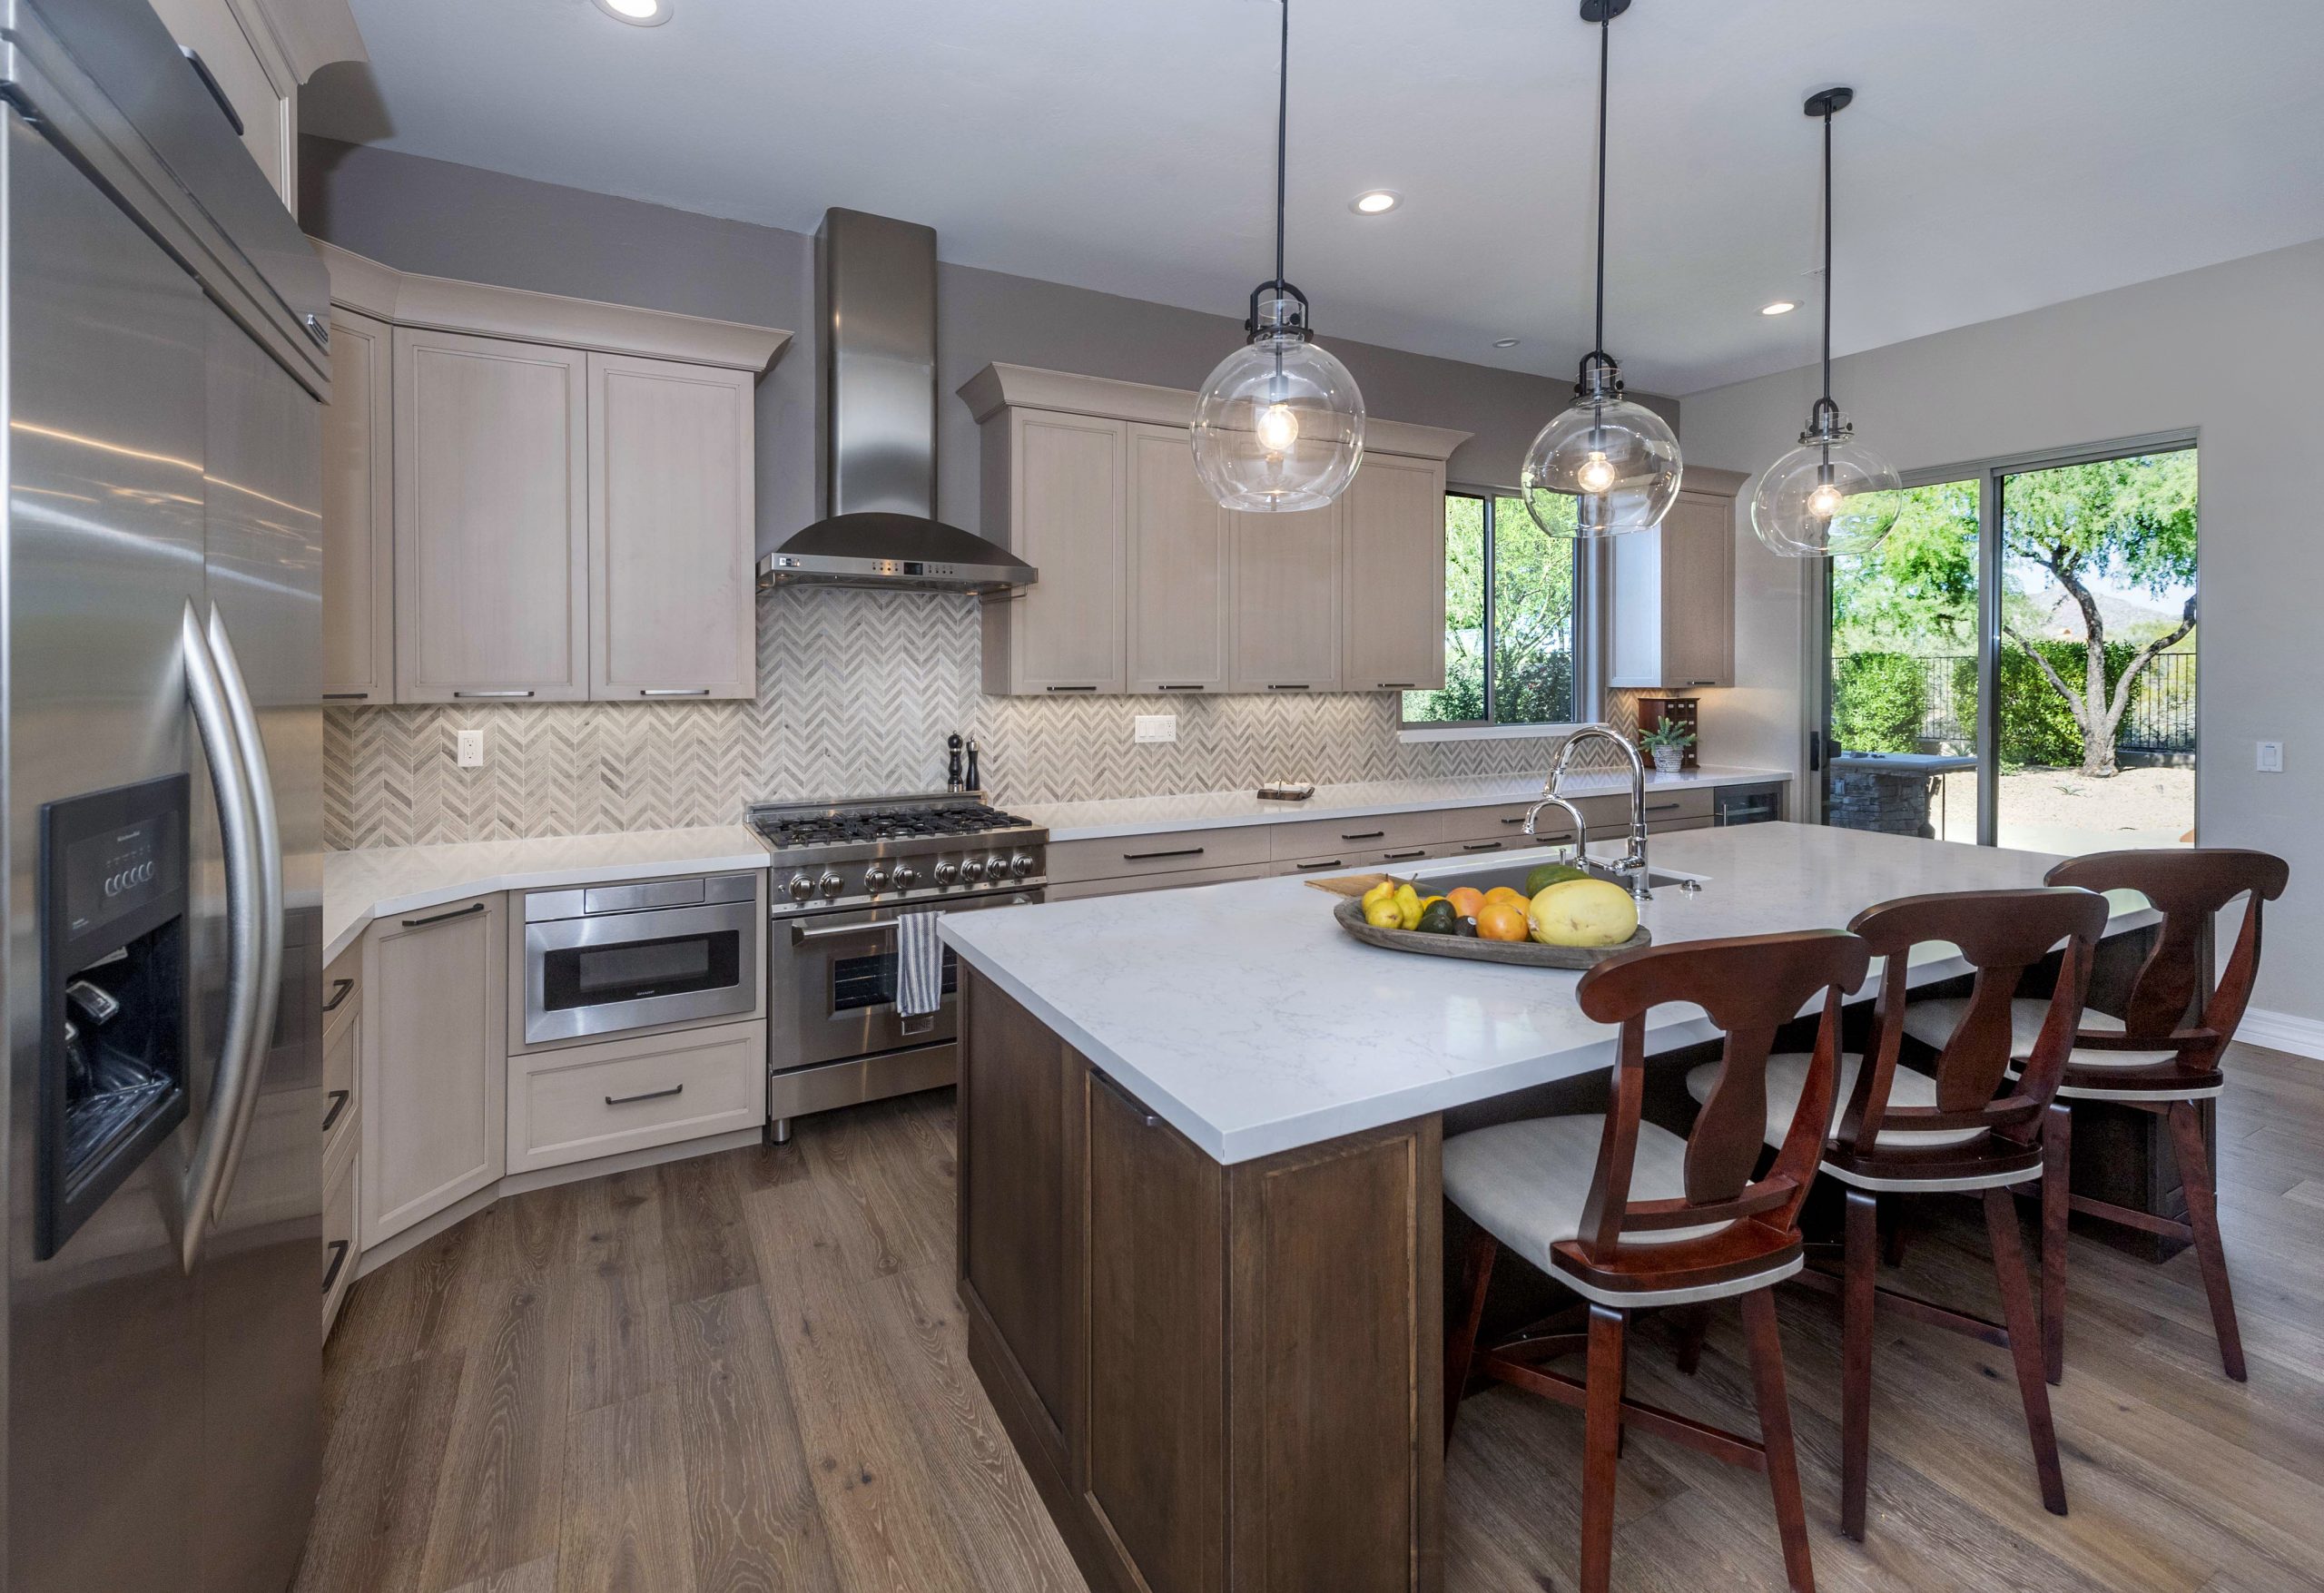 Kitchen redesign in Scottsdale with stainless appliances, light counters and dark island.